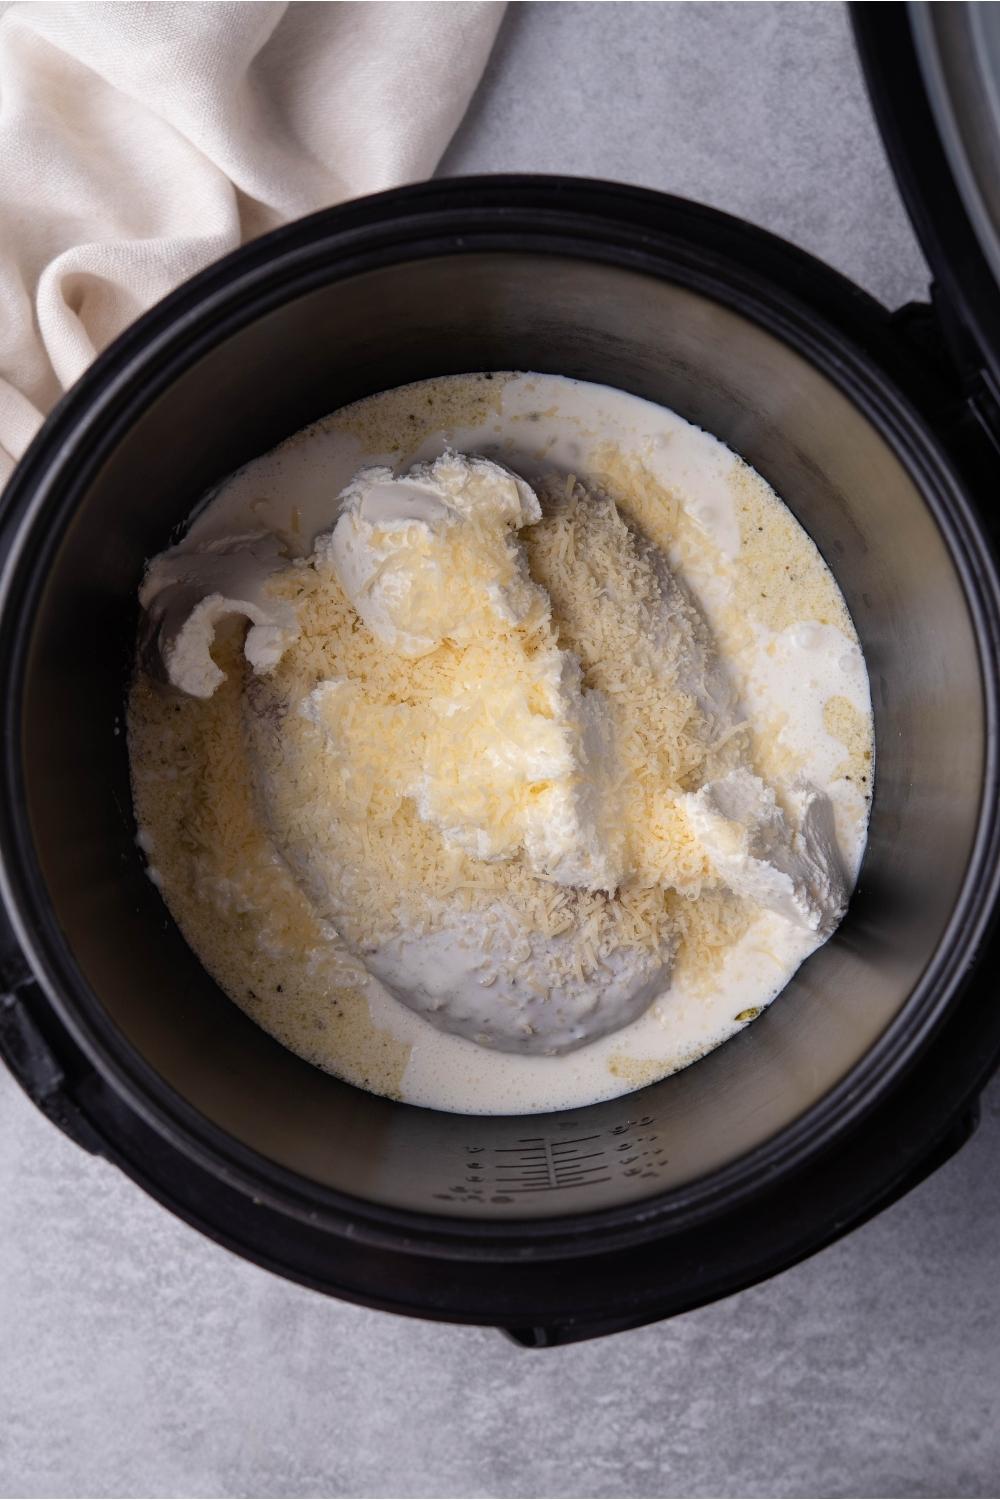 A black slow cooker with cooked chicken breasts covered in a creamy Italian dressing and shredded cheese. The slow cooker is on a grey counter and there is a partial view of a white kitchen towel.